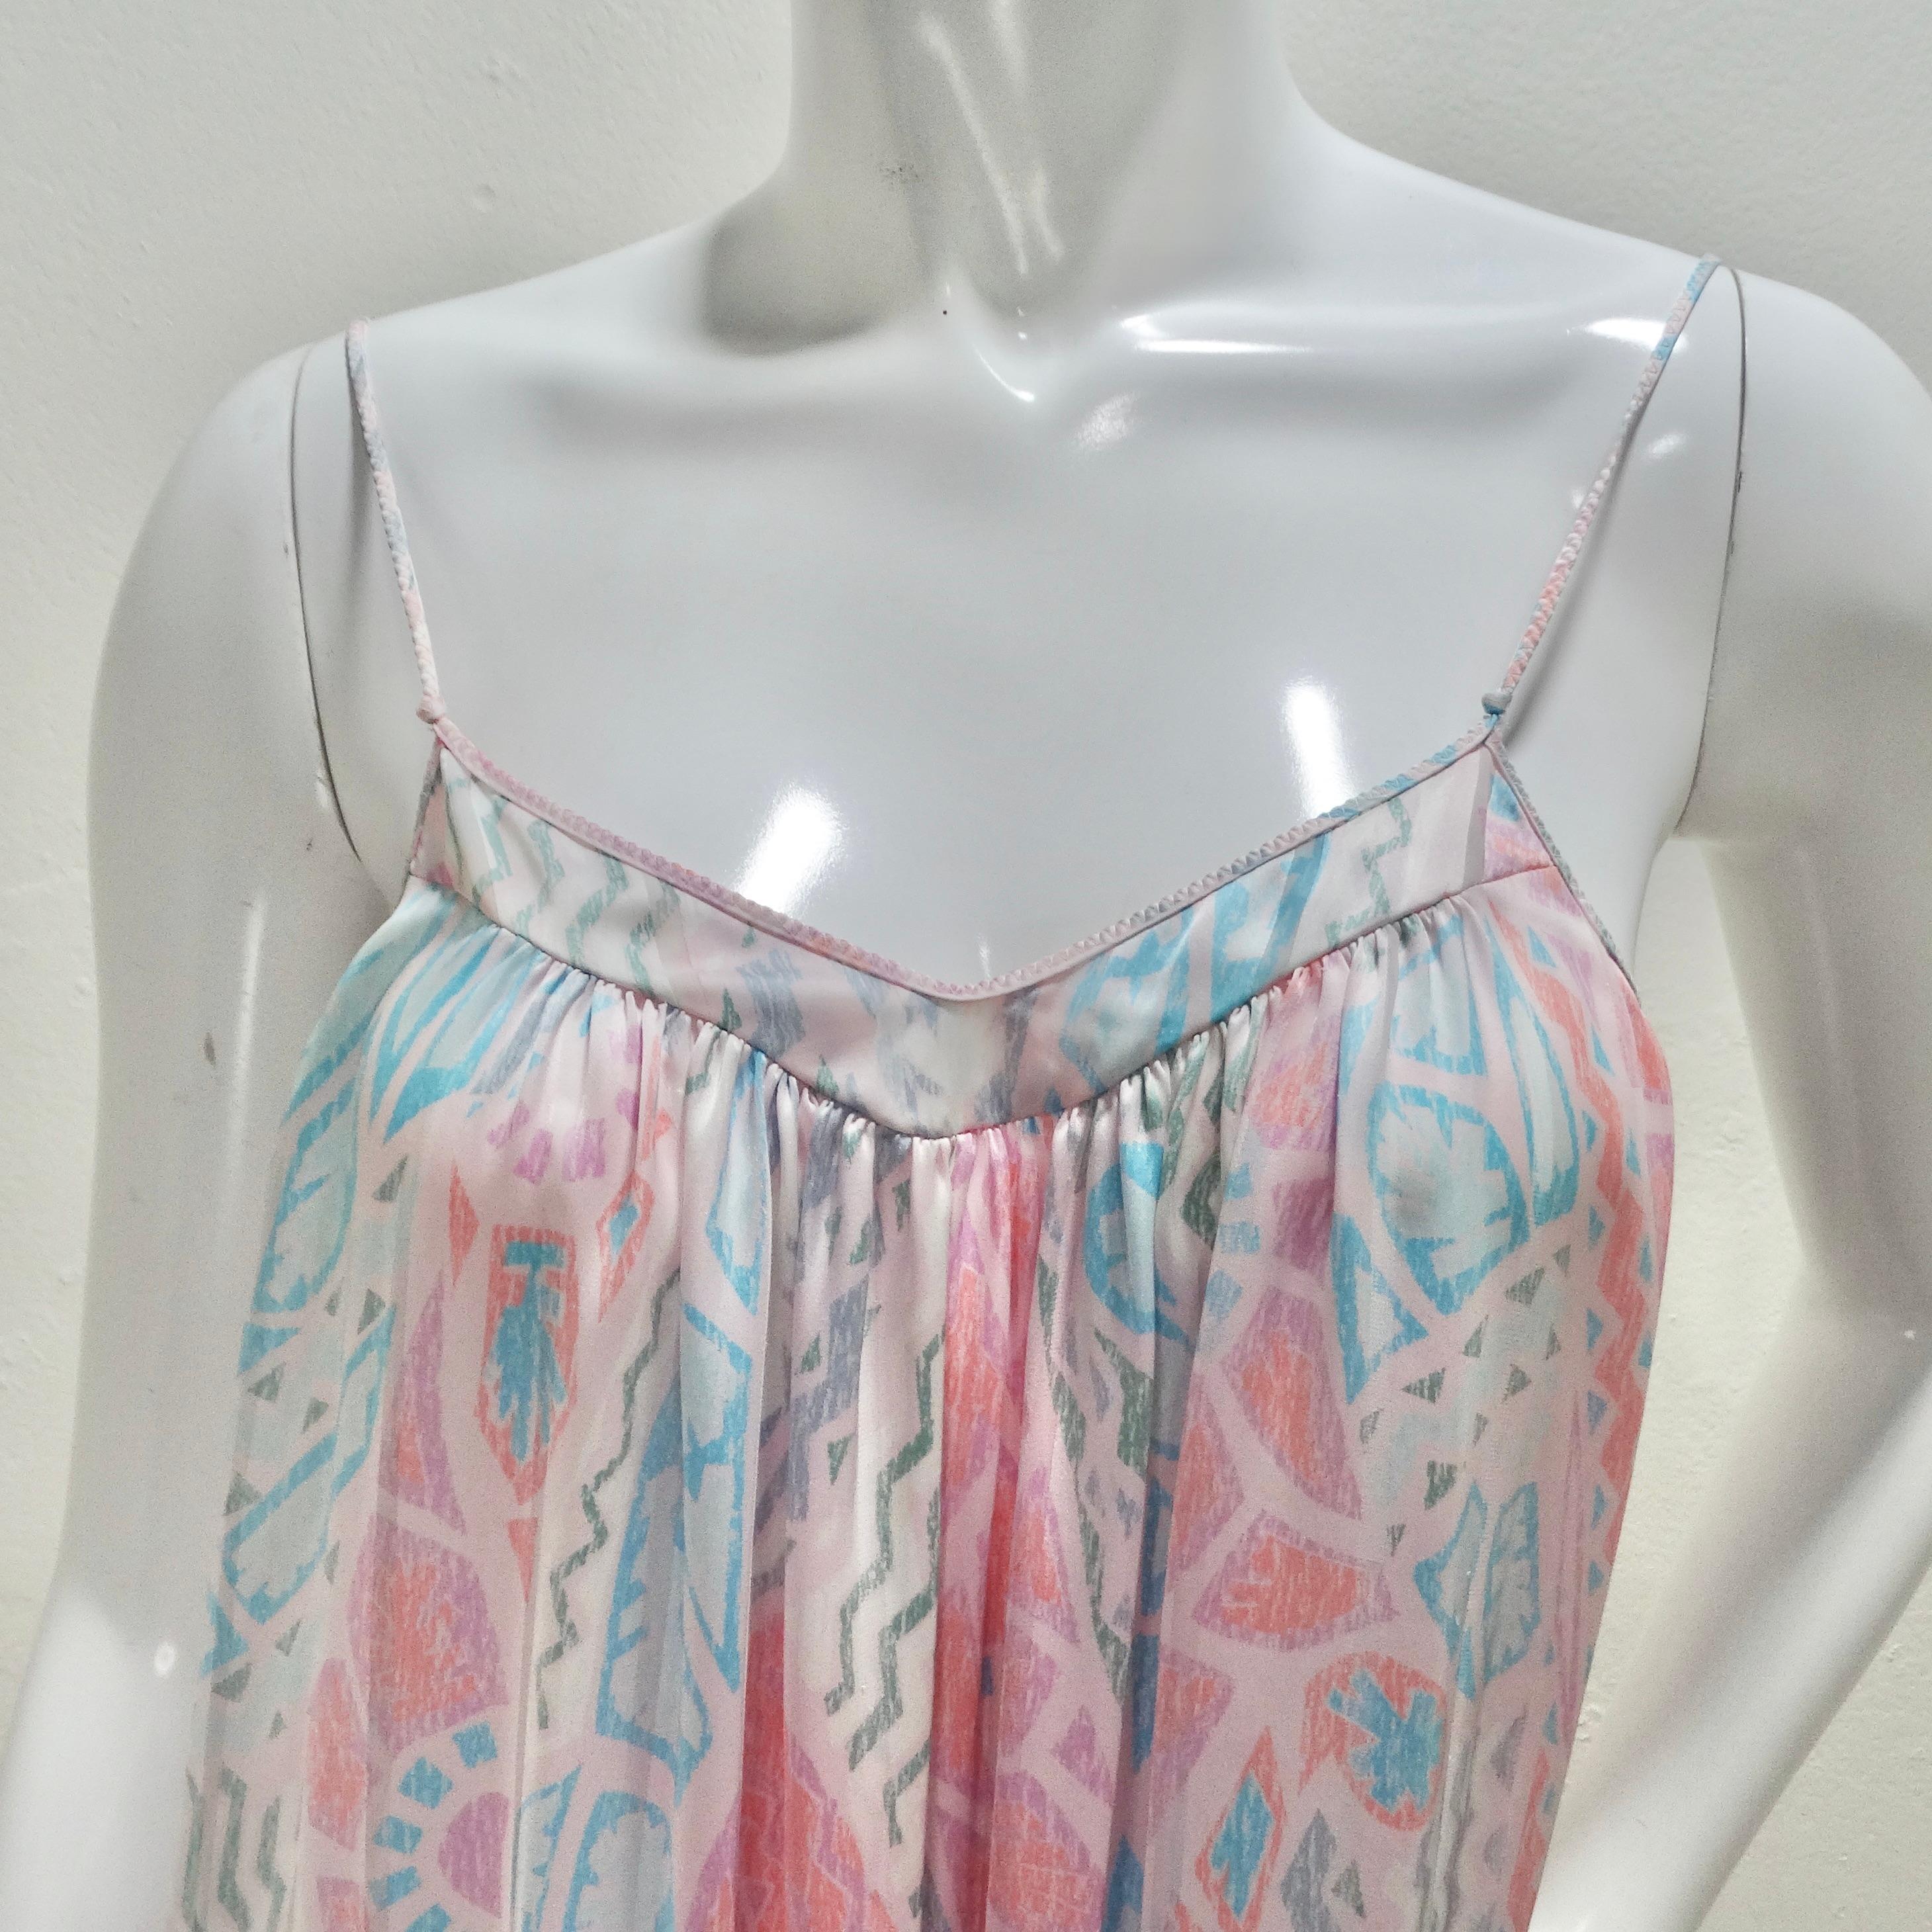 Mary McFadden 1980s Printed Slip Dress In Good Condition For Sale In Scottsdale, AZ